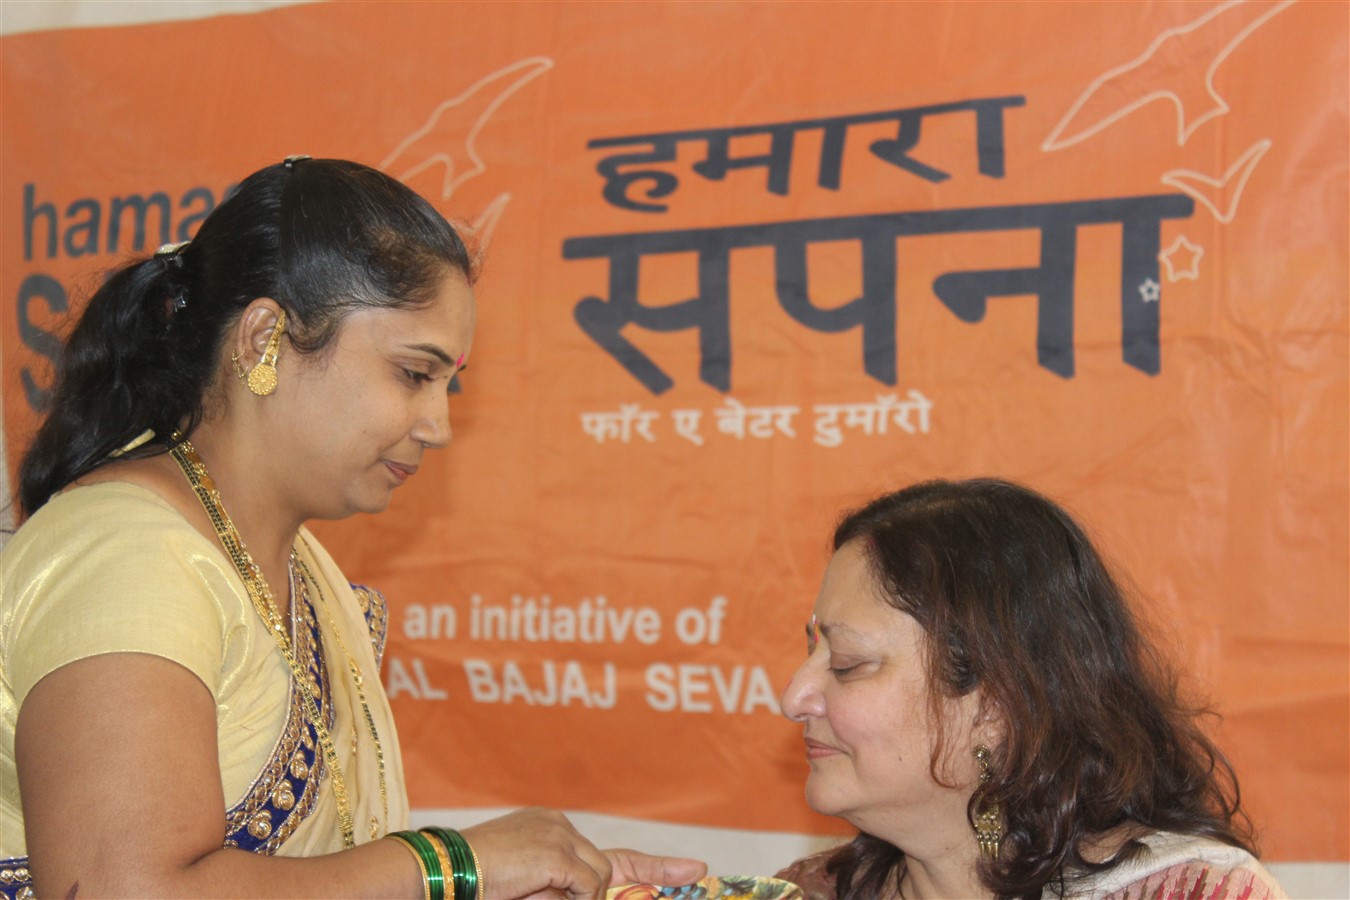 Everyone wants to e blessed by Ms. Minal Bajaj
